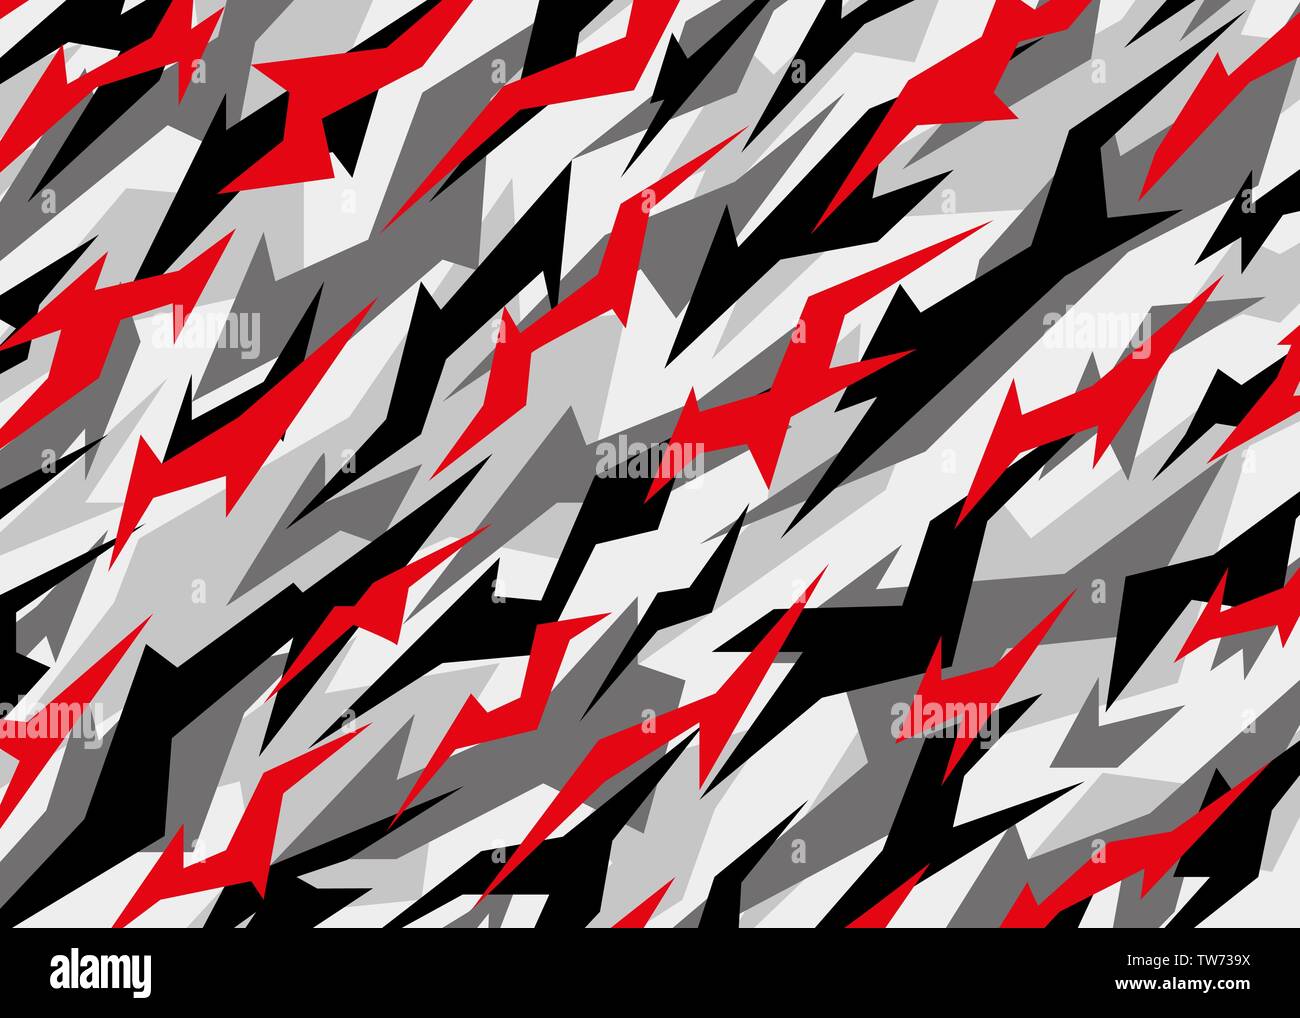 Grey camouflage pattern with red tones. Modern abstract camo Vector background illustration for web, banner, backdrop, graphic or surface design use Stock Vector